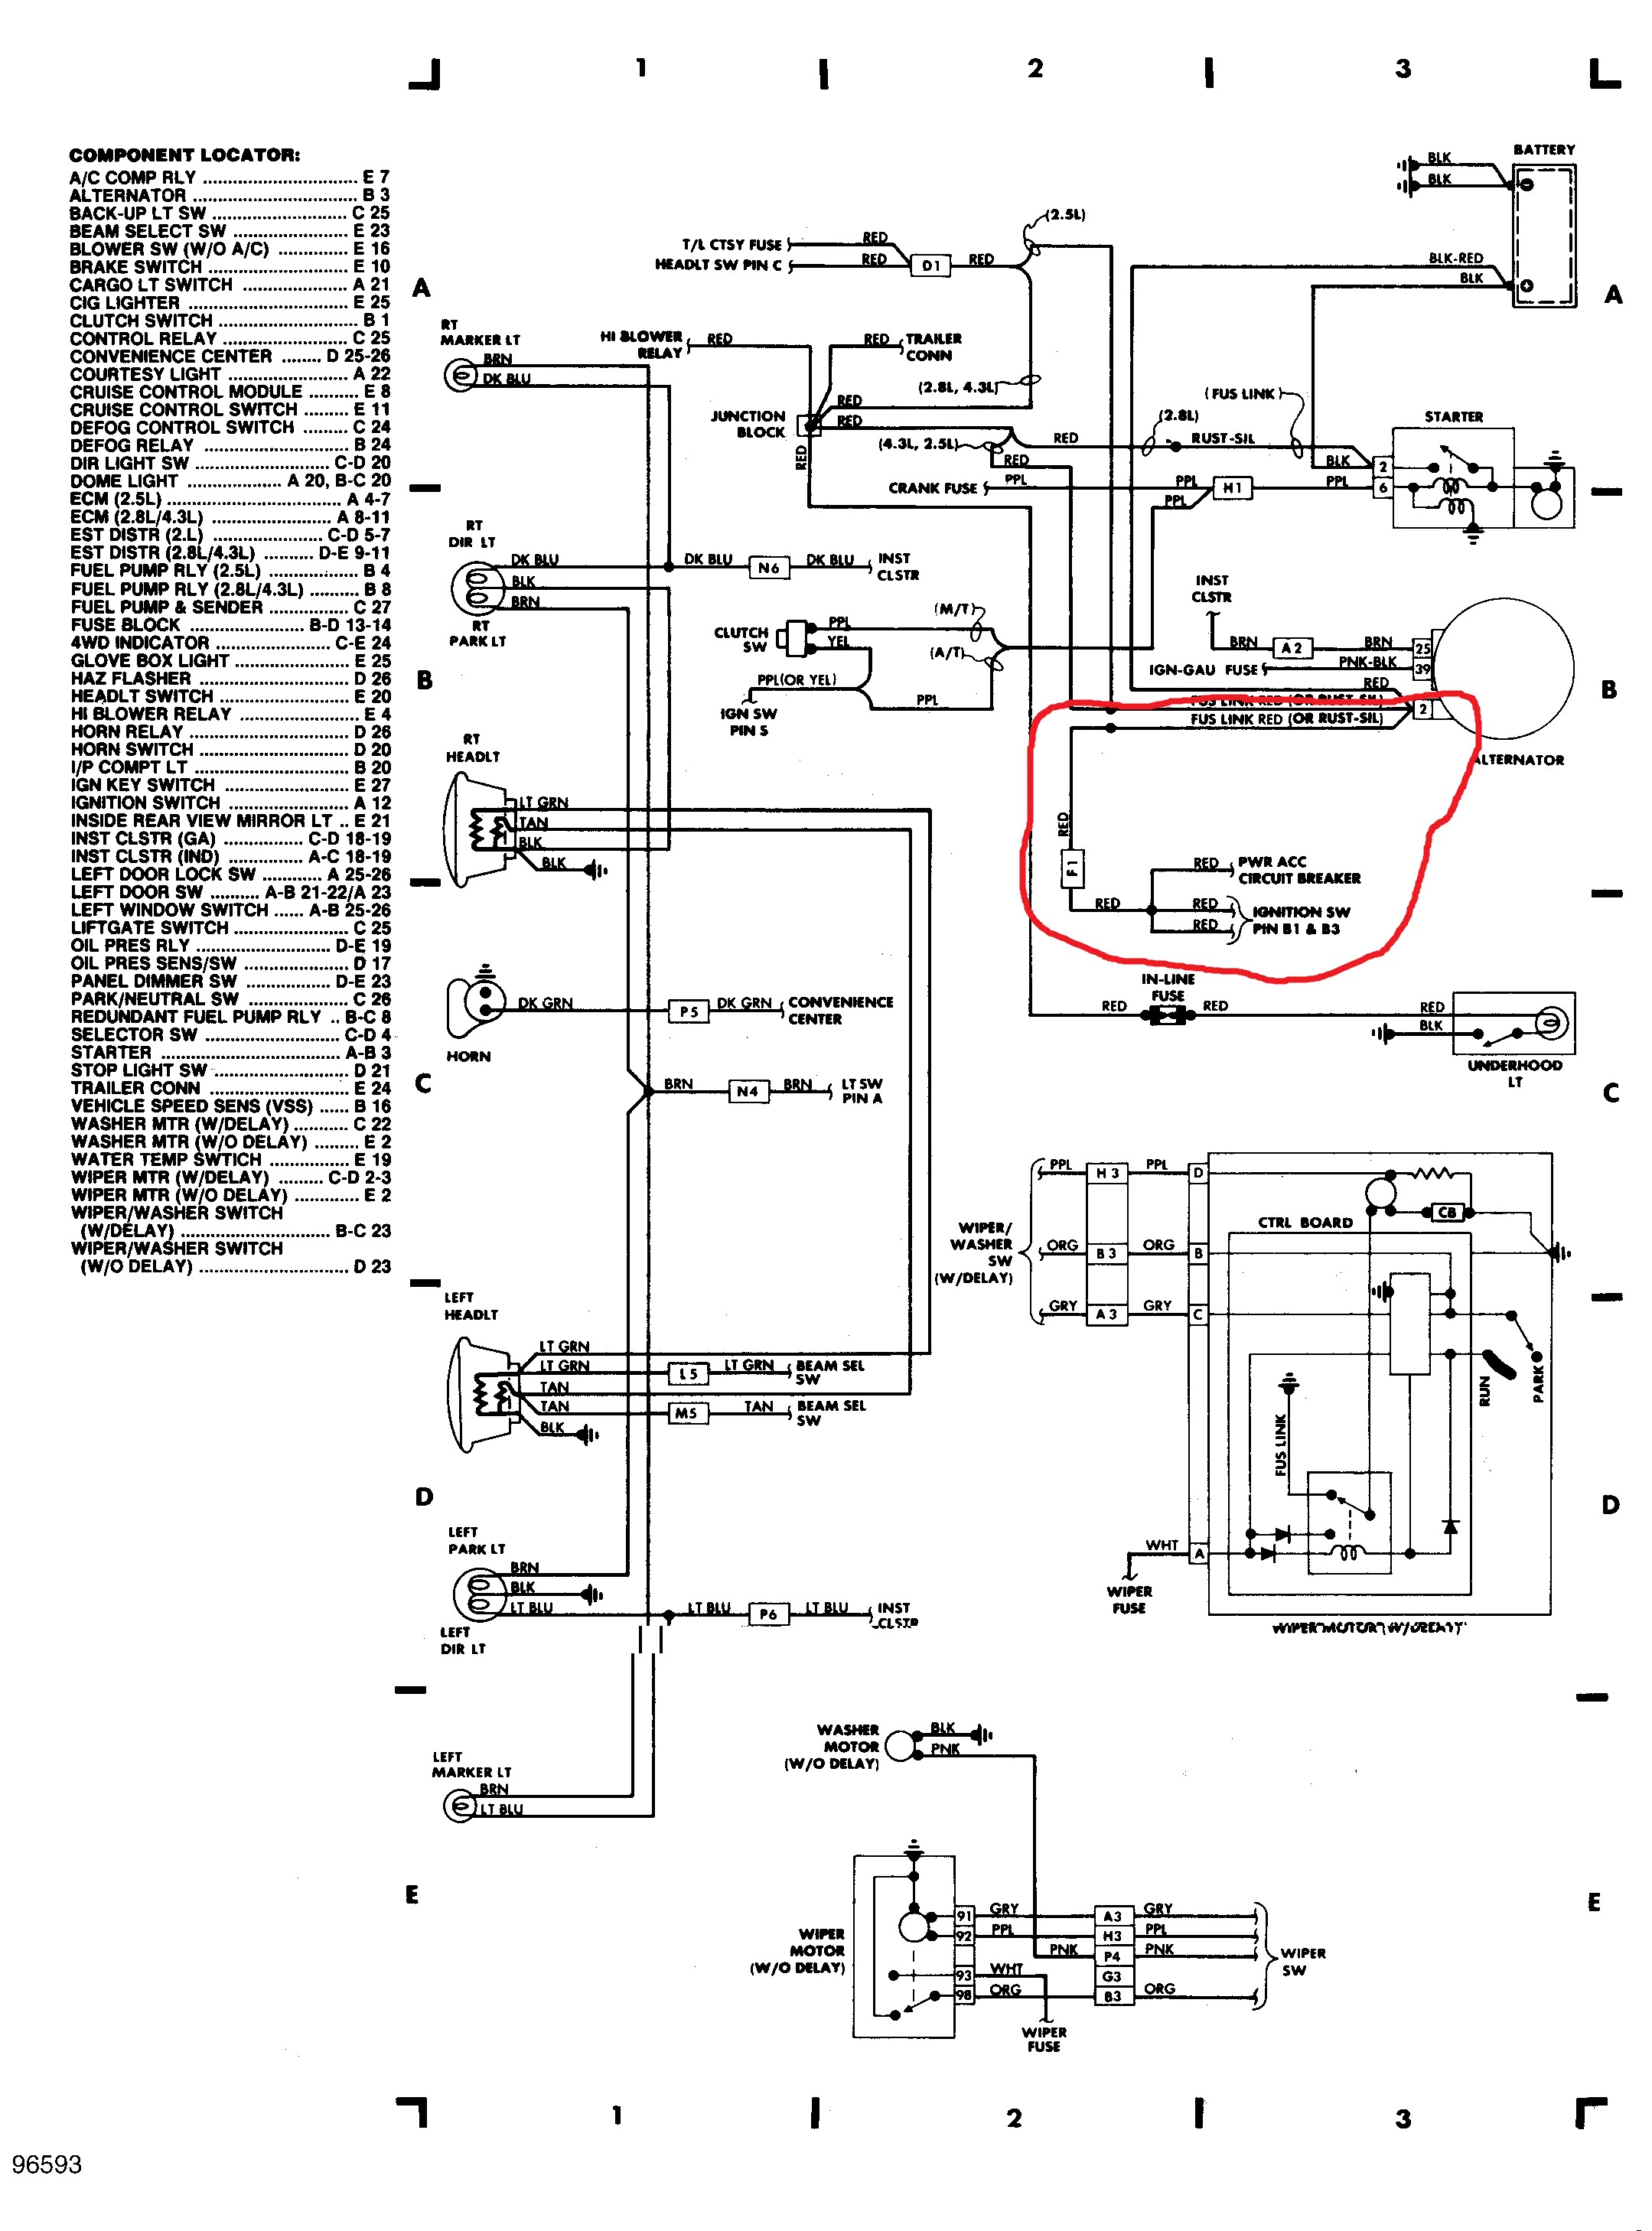 2000 ford F150 Ignition Switch Wiring Diagram Diagram] ford Truck Ignition Switch Diagram Full Version Hd Of 2000 ford F150 Ignition Switch Wiring Diagram